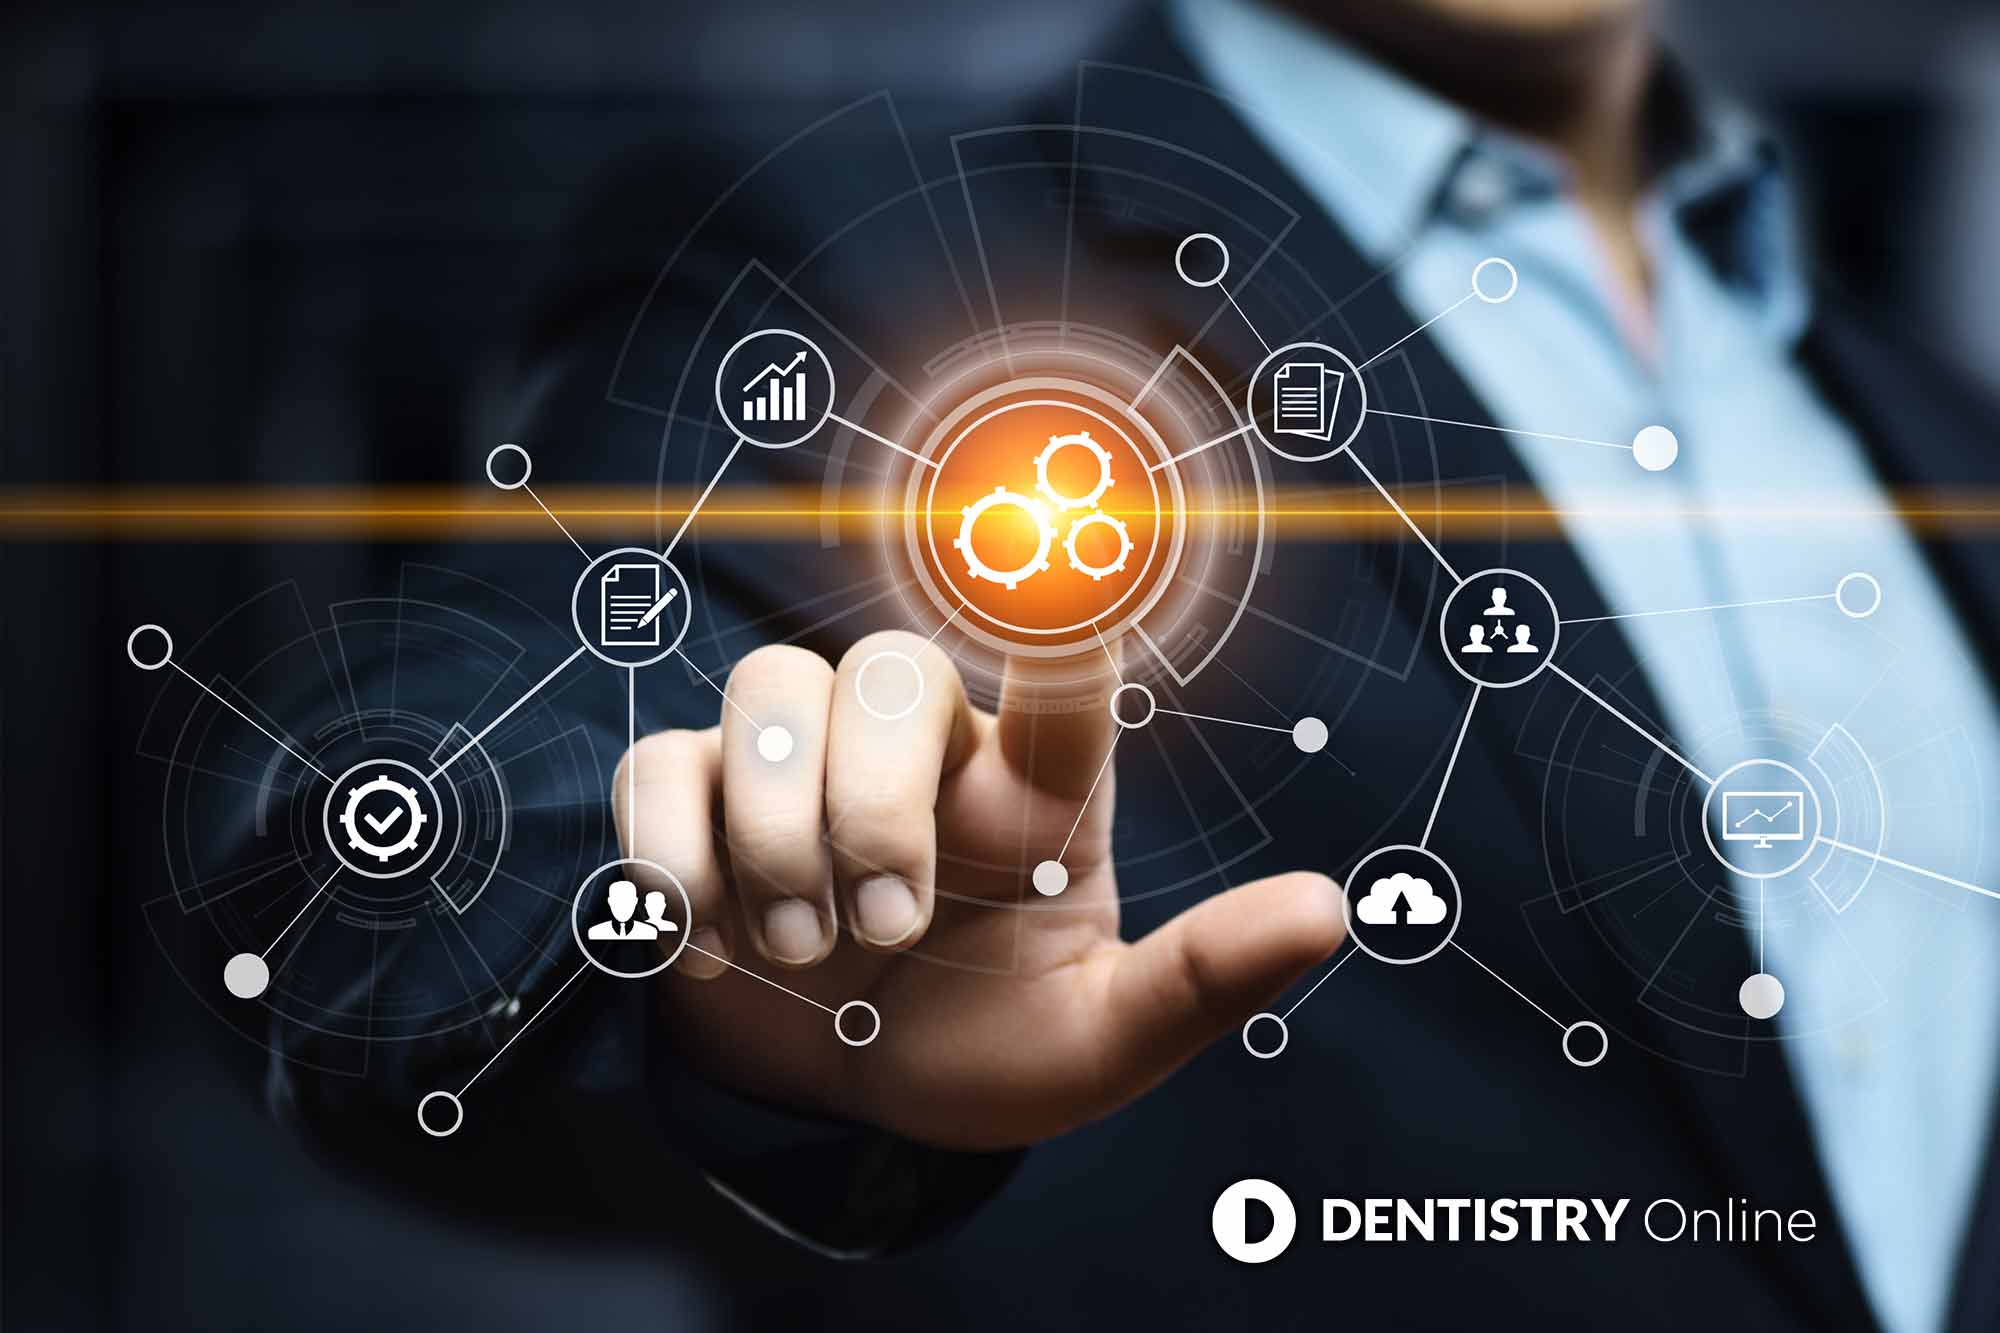 Align Technology has launched its 'Myitero workflow', designed to significantly improve the collaboration between dental practices and laboratories